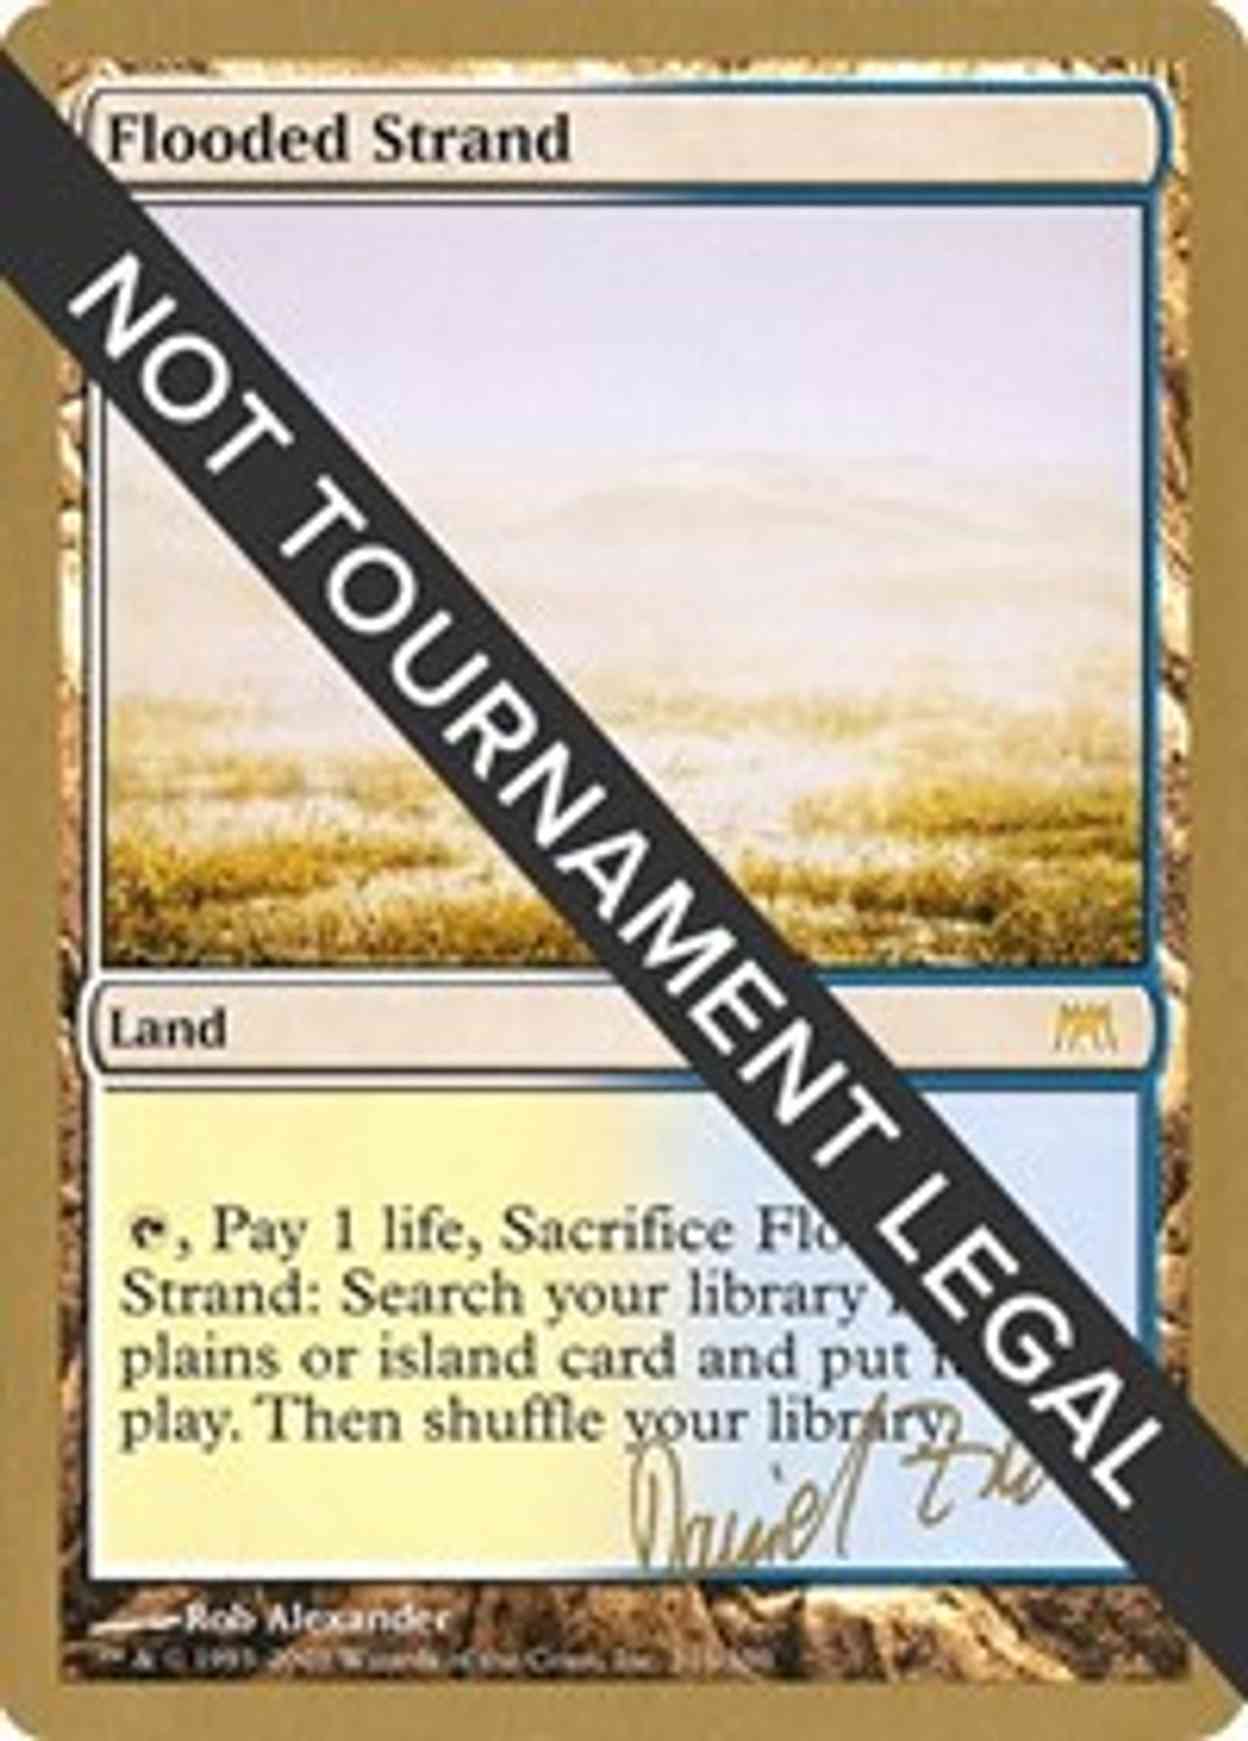 Flooded Strand - 2003 Daniel Zink (ONS) magic card front